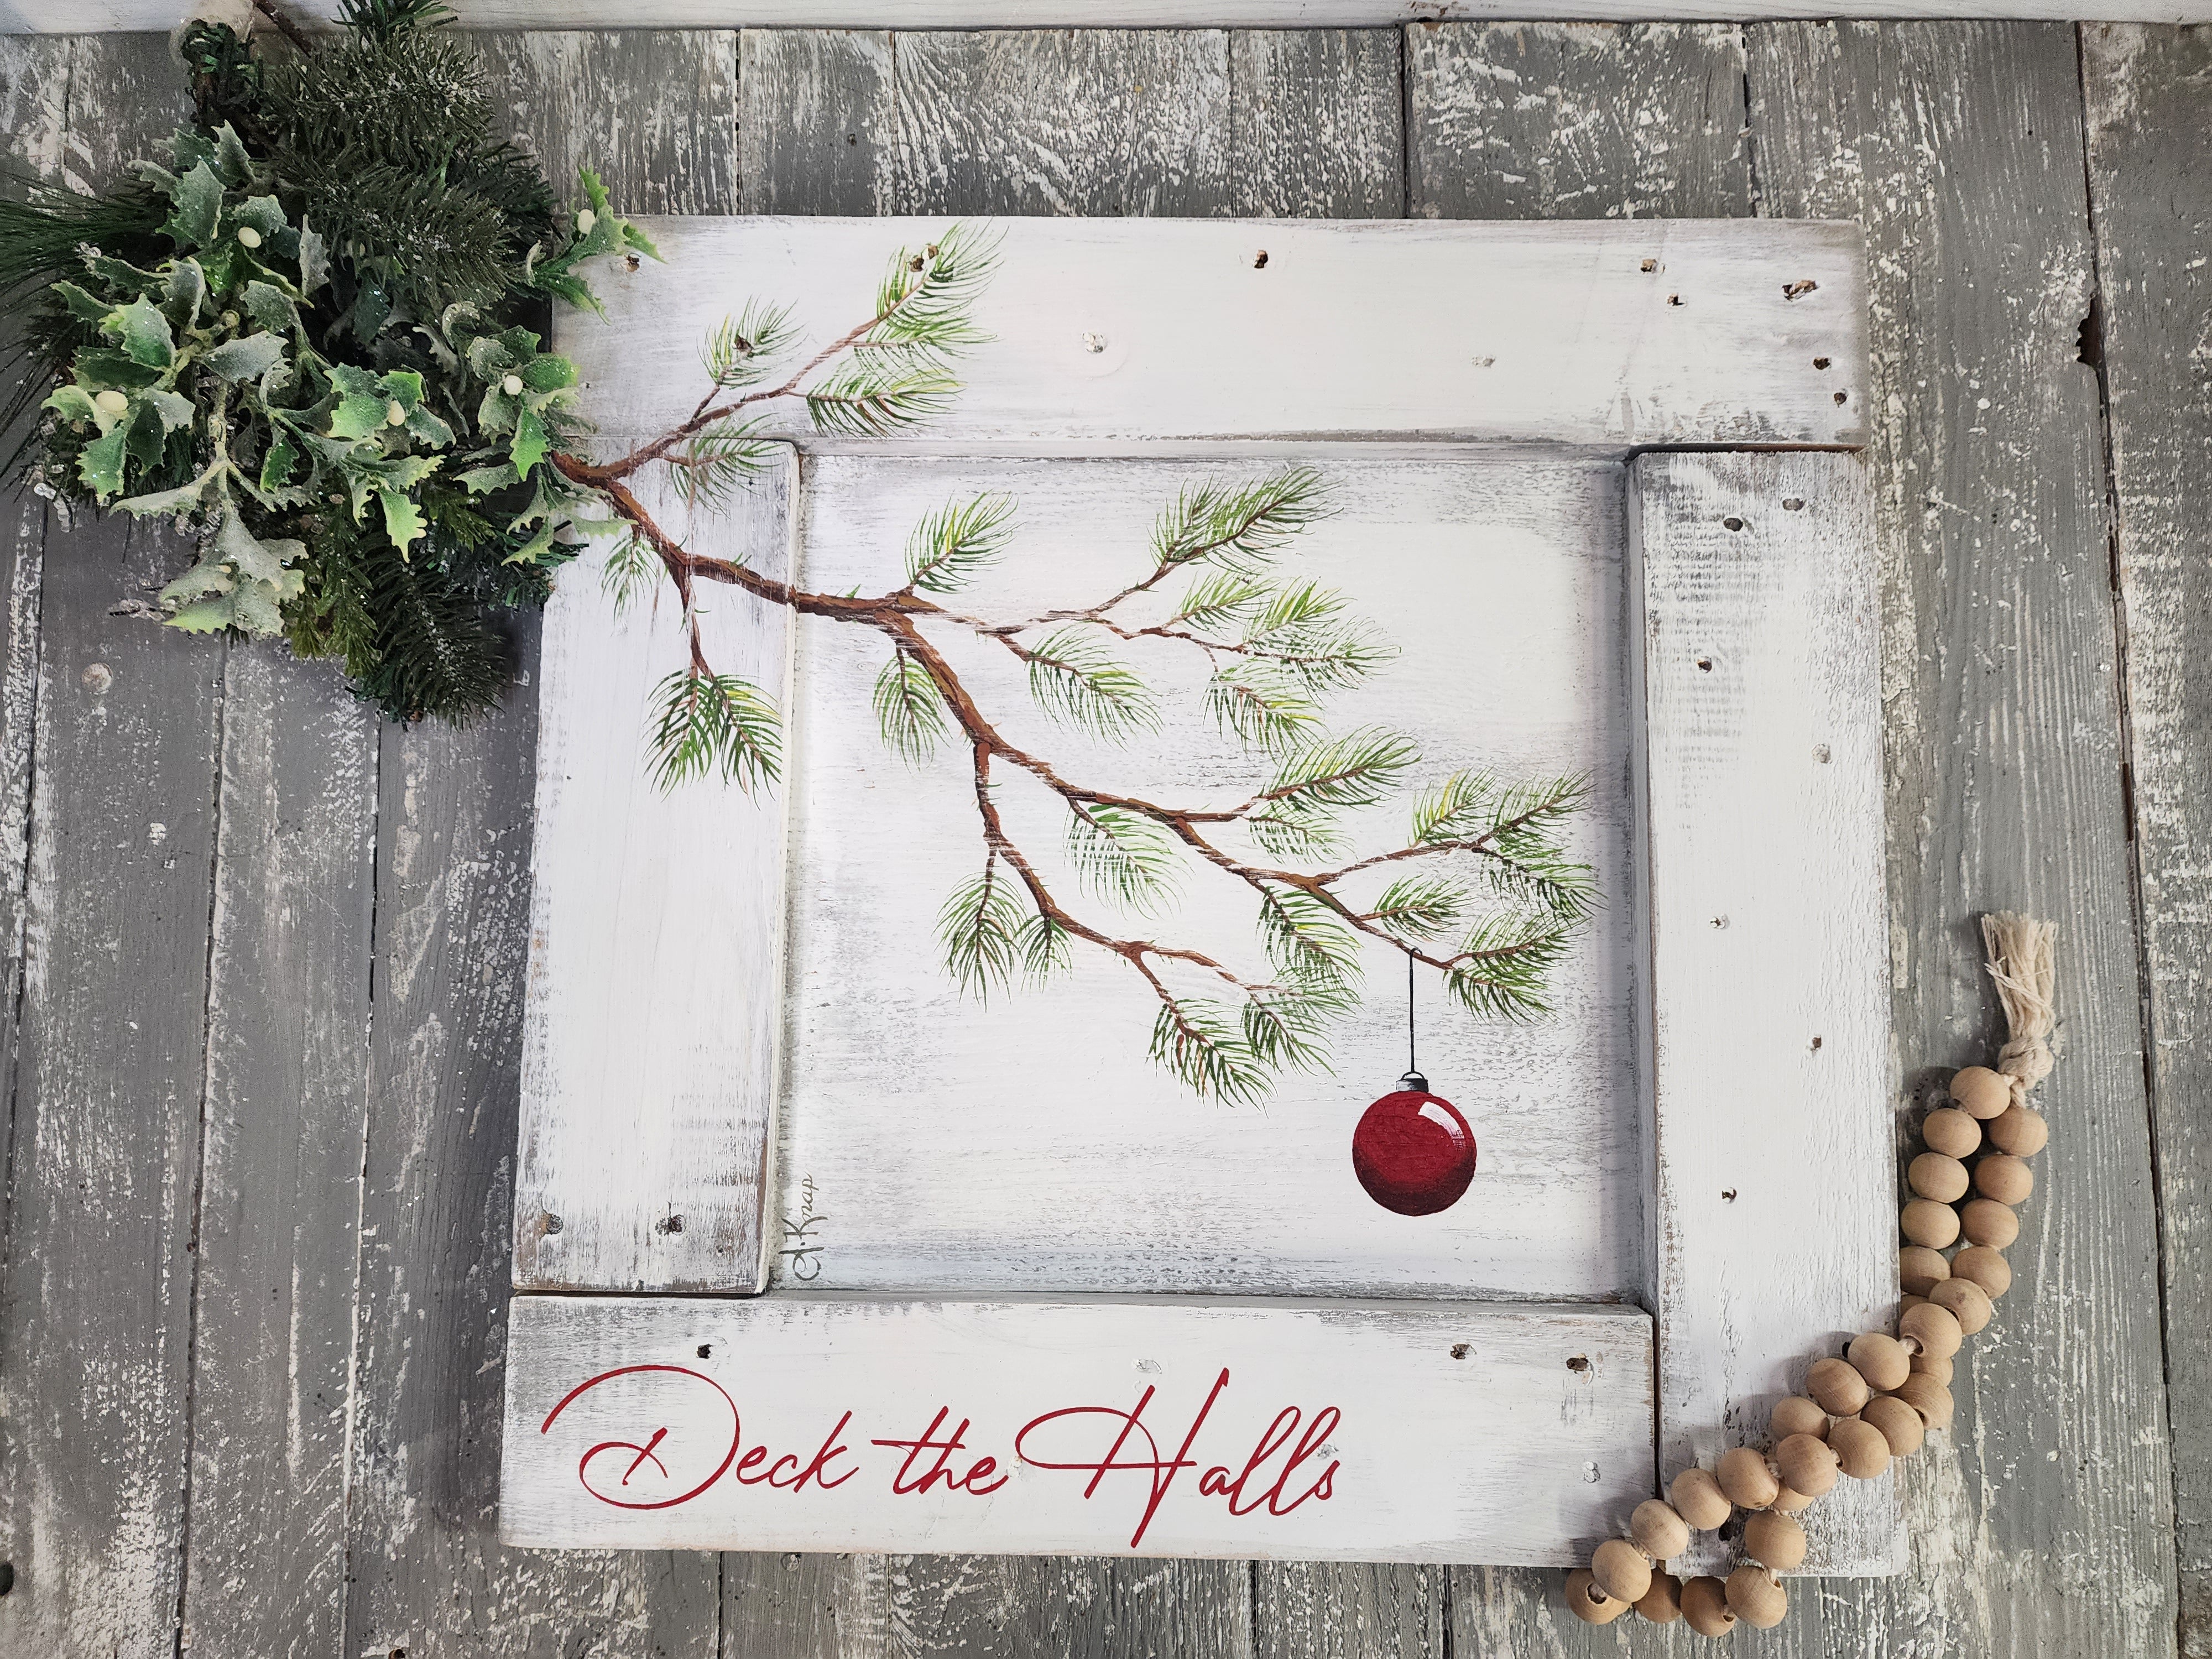 Christmas pine branches with red ornament, hand painted on whitewashed pallet wood, Deck the Halls, Christmas rustic farmhouse decor